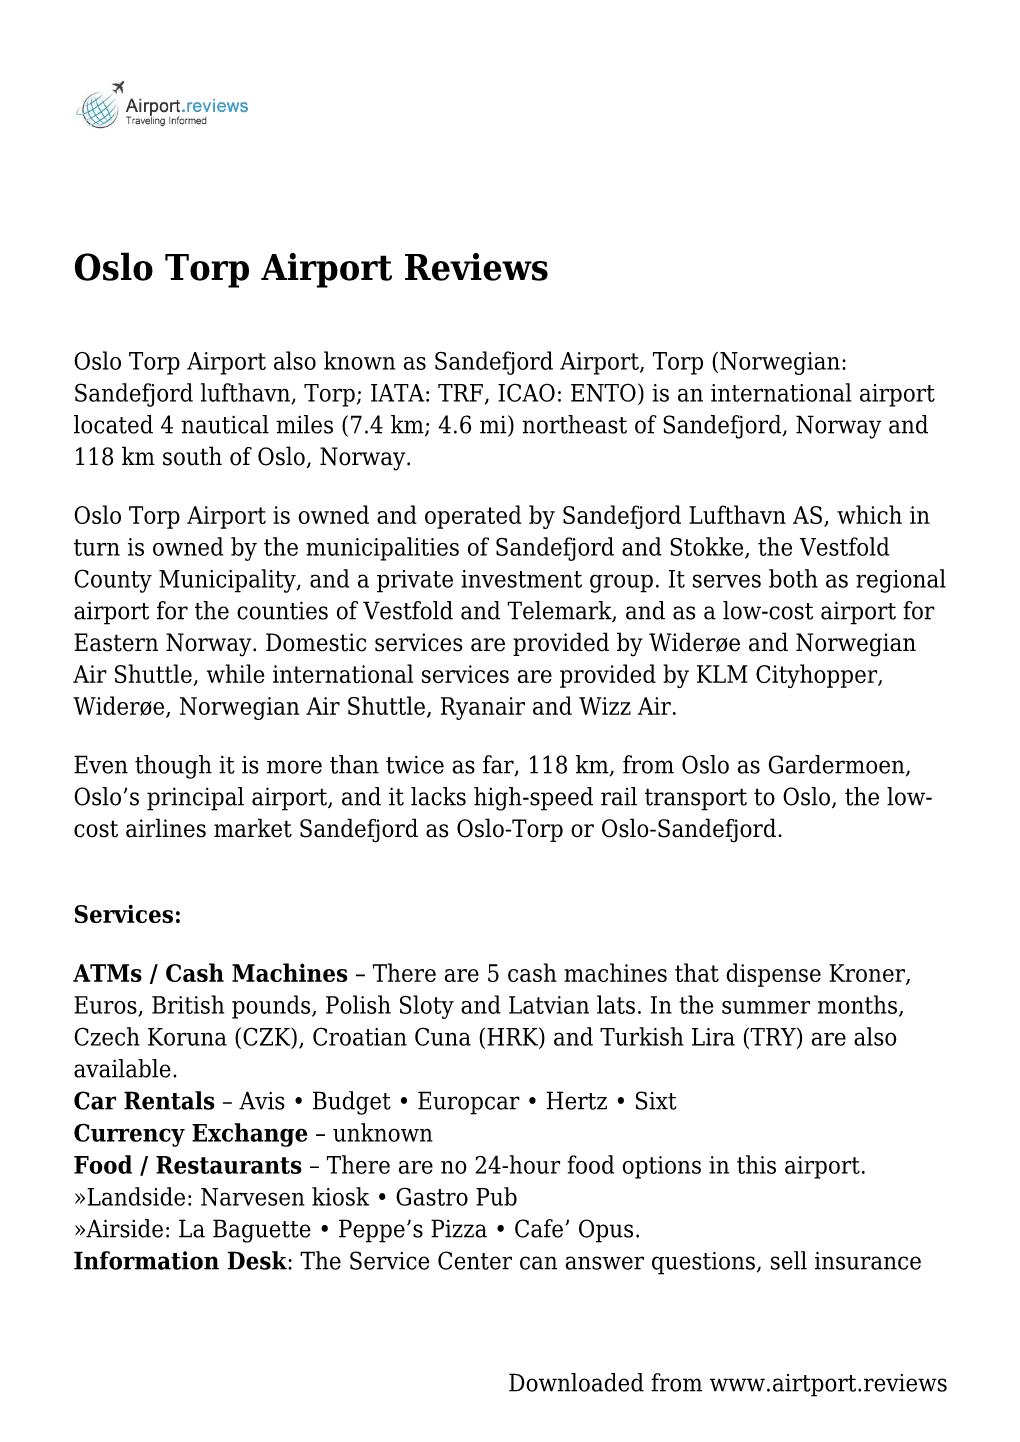 Oslo Torp Airport Reviews